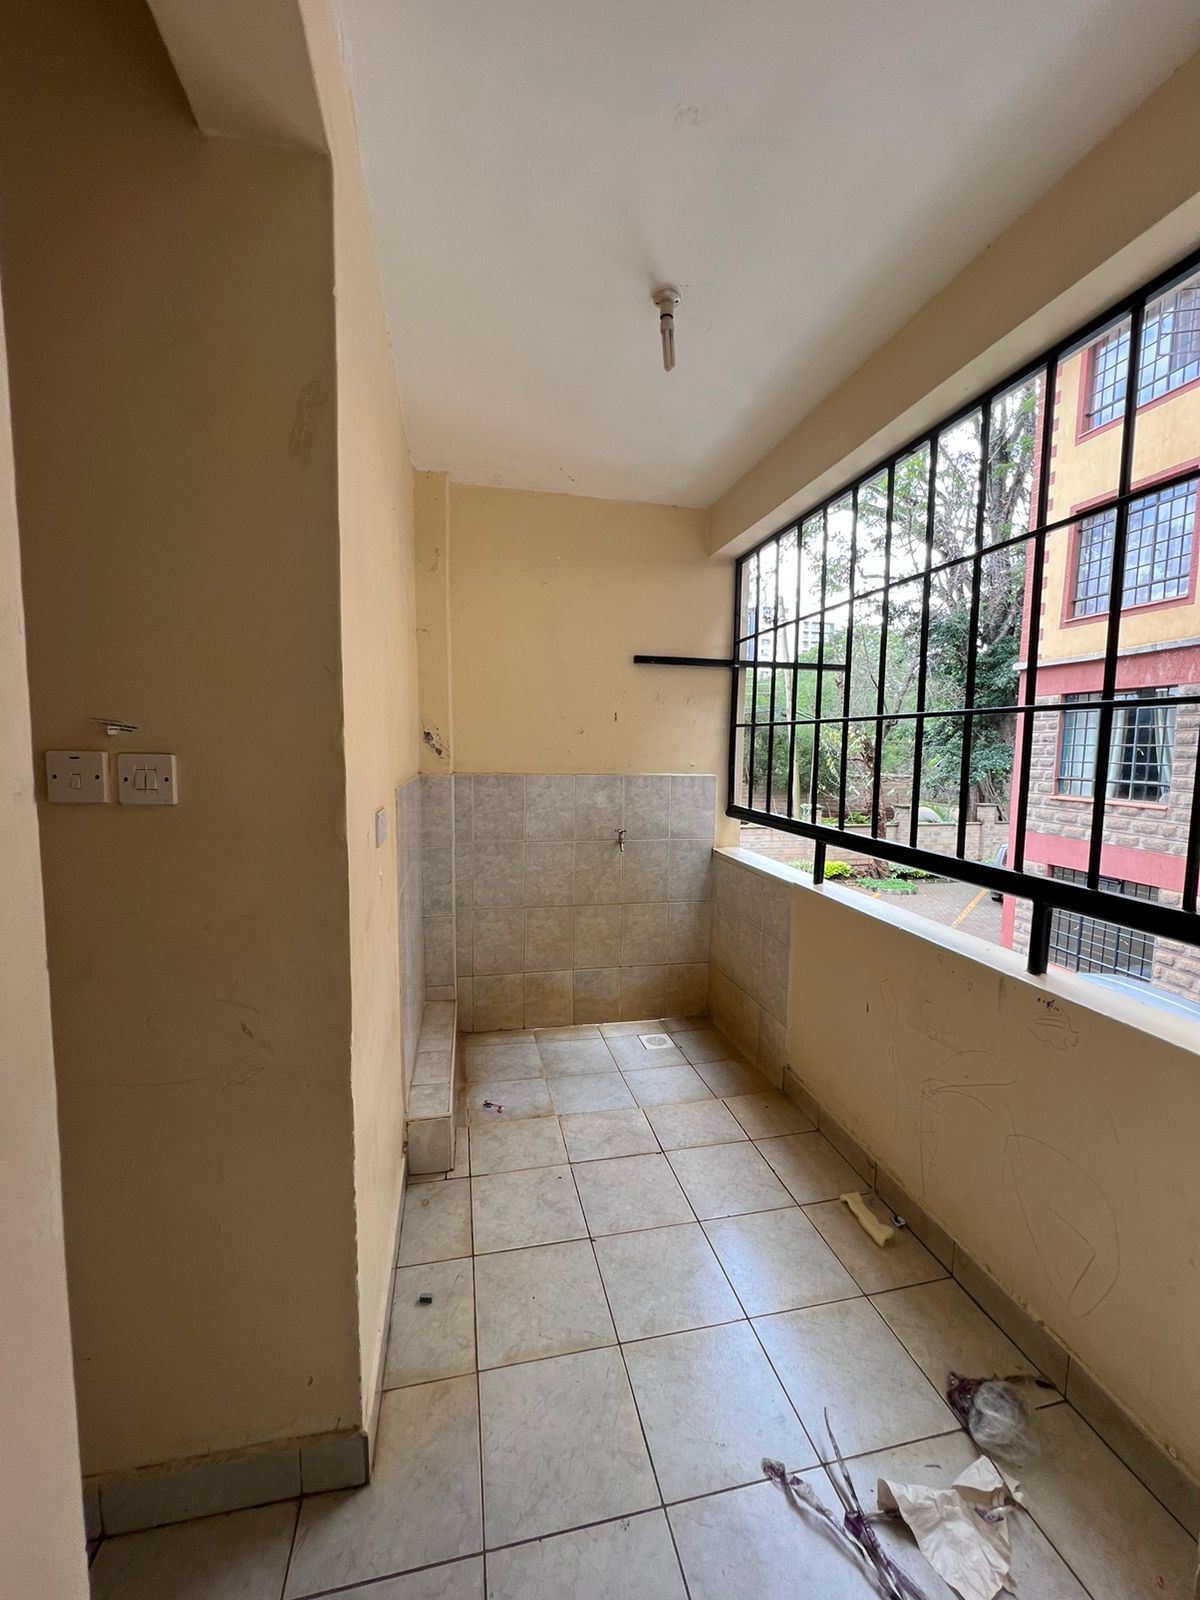 3 bedroom plus dsq apartment to let located in leafy suburb of lavington. shared swimming pool. Rent per month 85,000 Musilli Homes